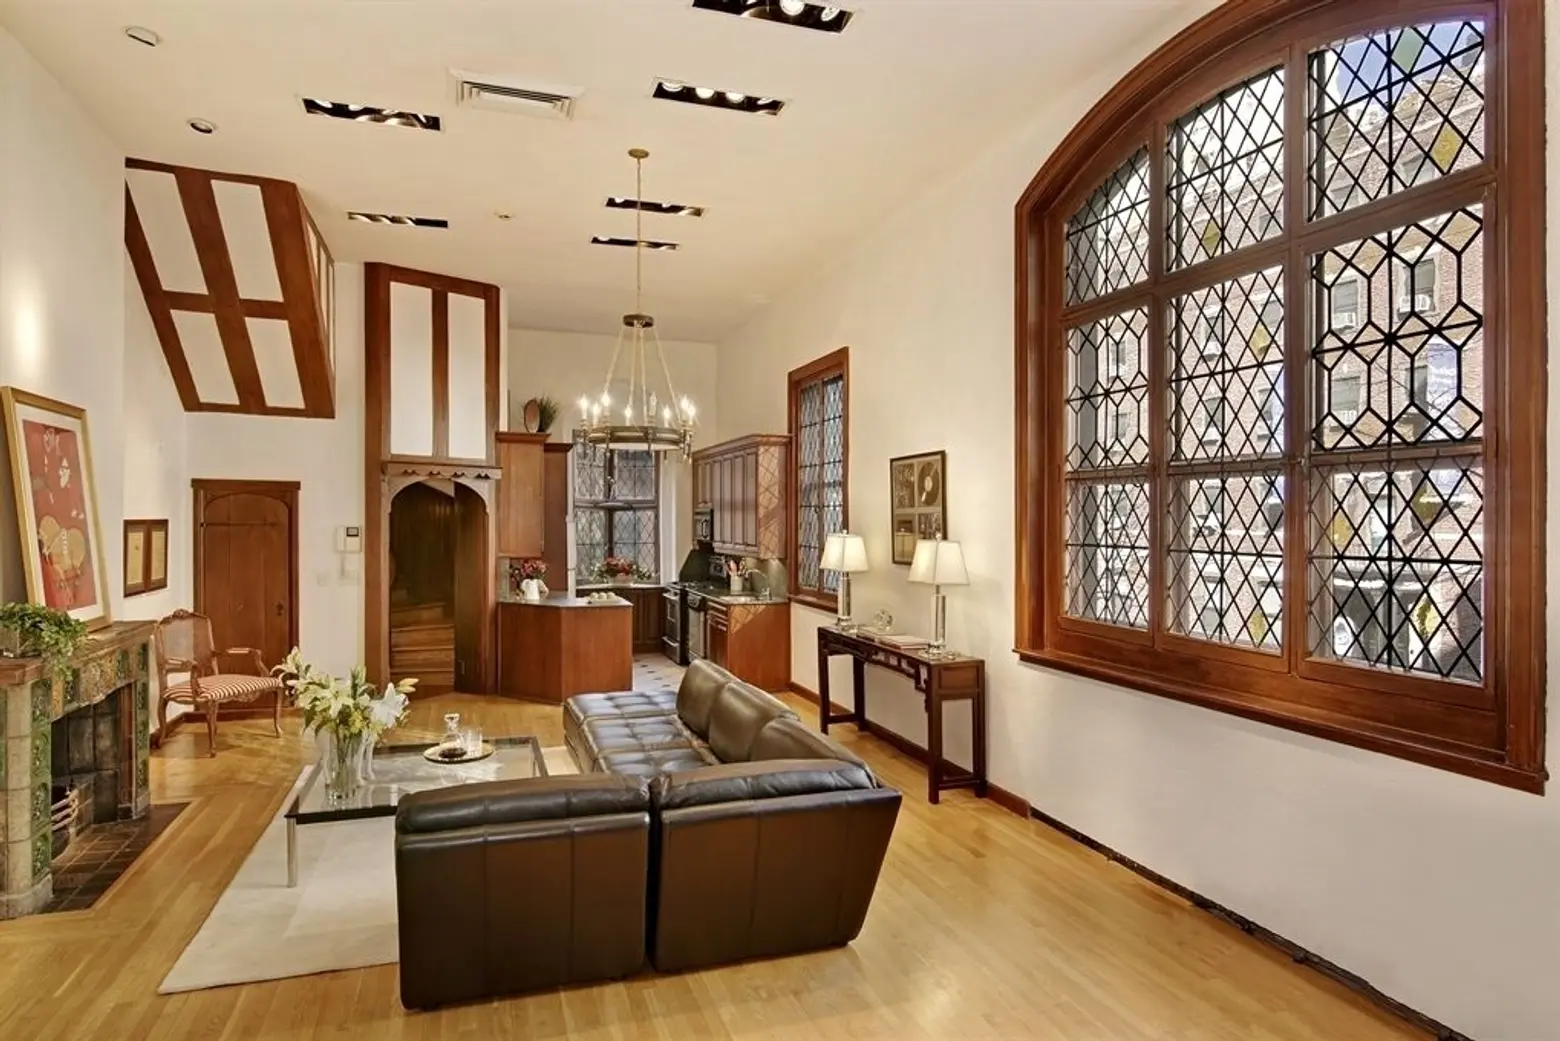 Cole Porter’s former Manhattan townhouse in historic Sniffen Court enclave has sold for $4.8M